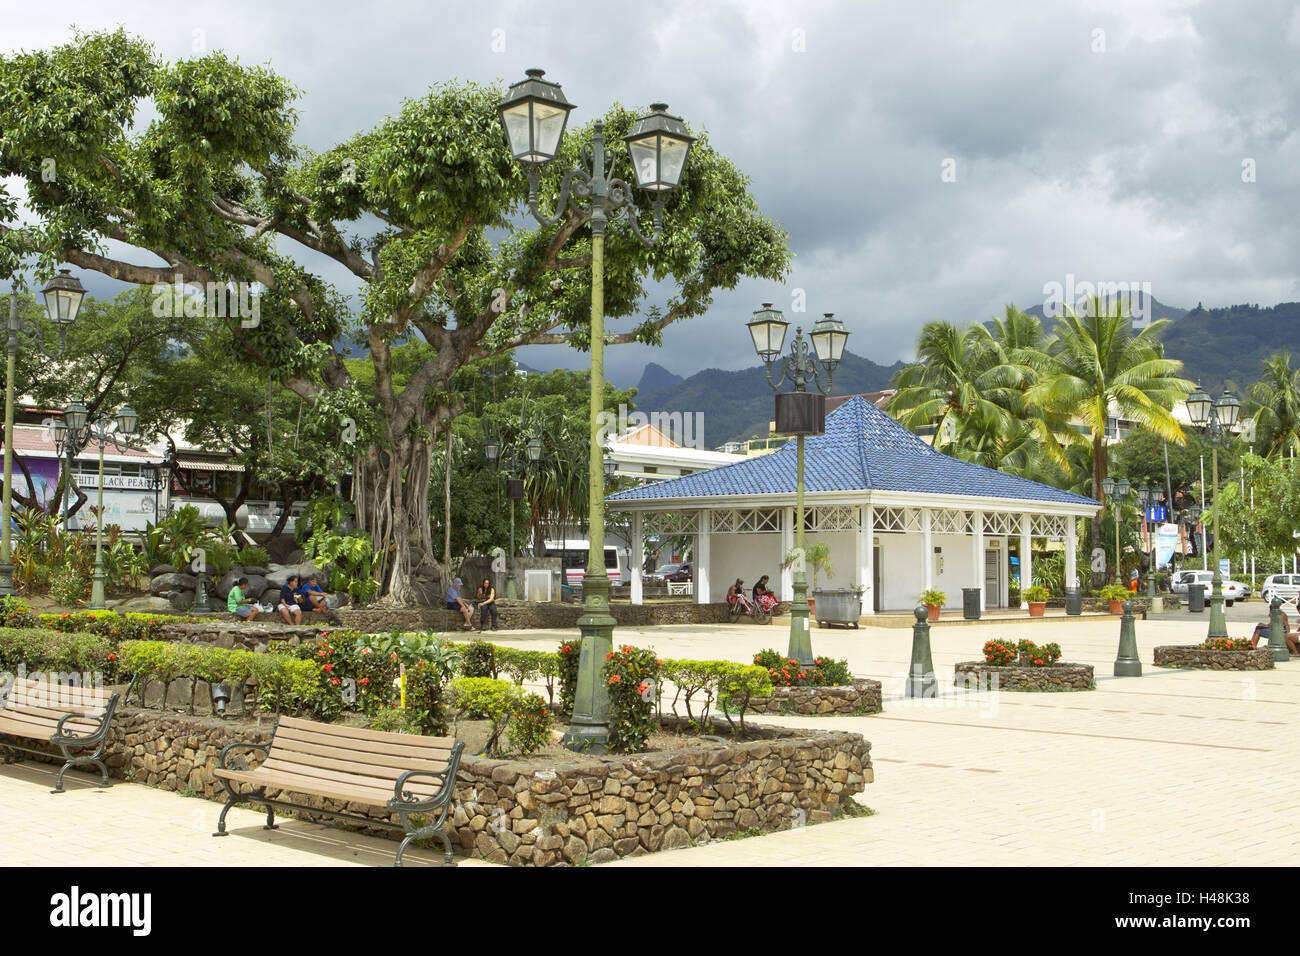 French Polynesia, Papeete, park, the Society Islands, Tahiti, space, park-bench, locals, people, tourists, buildings, palms, trees, lanterns, heavens, cloudies, saddles, Stock Photo